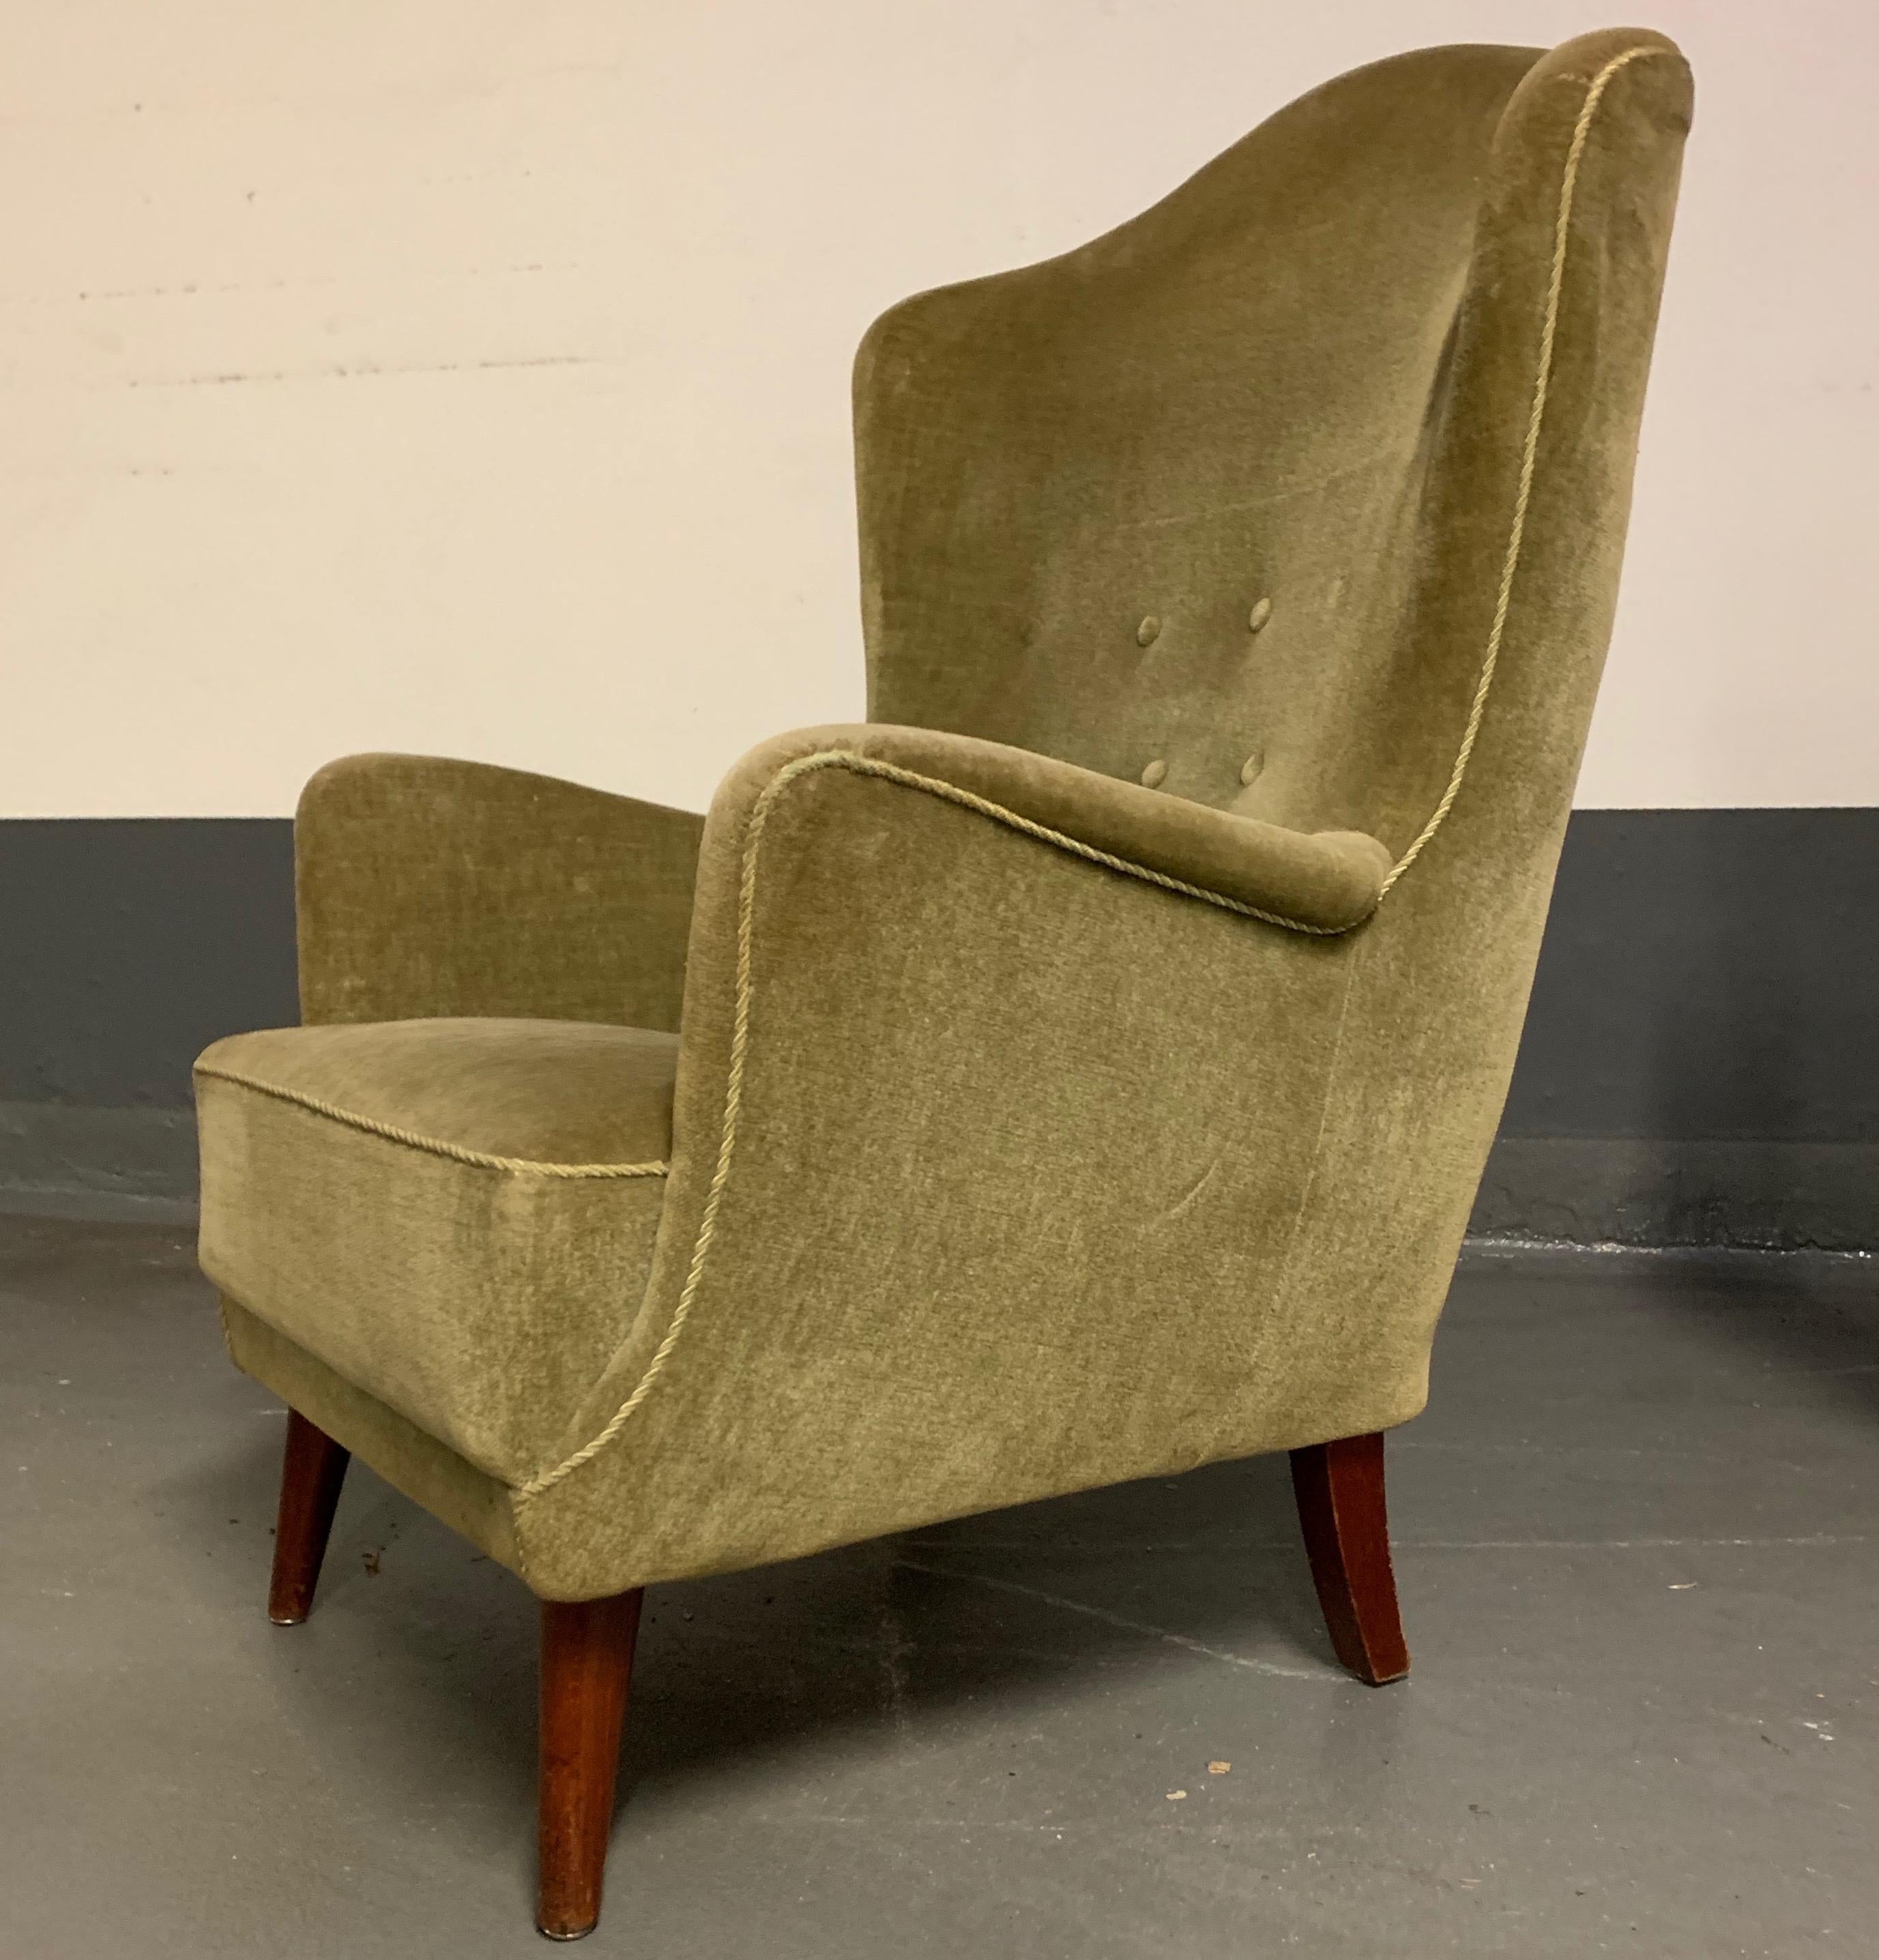 Original velvet upholstery. Chair with footstool also available.